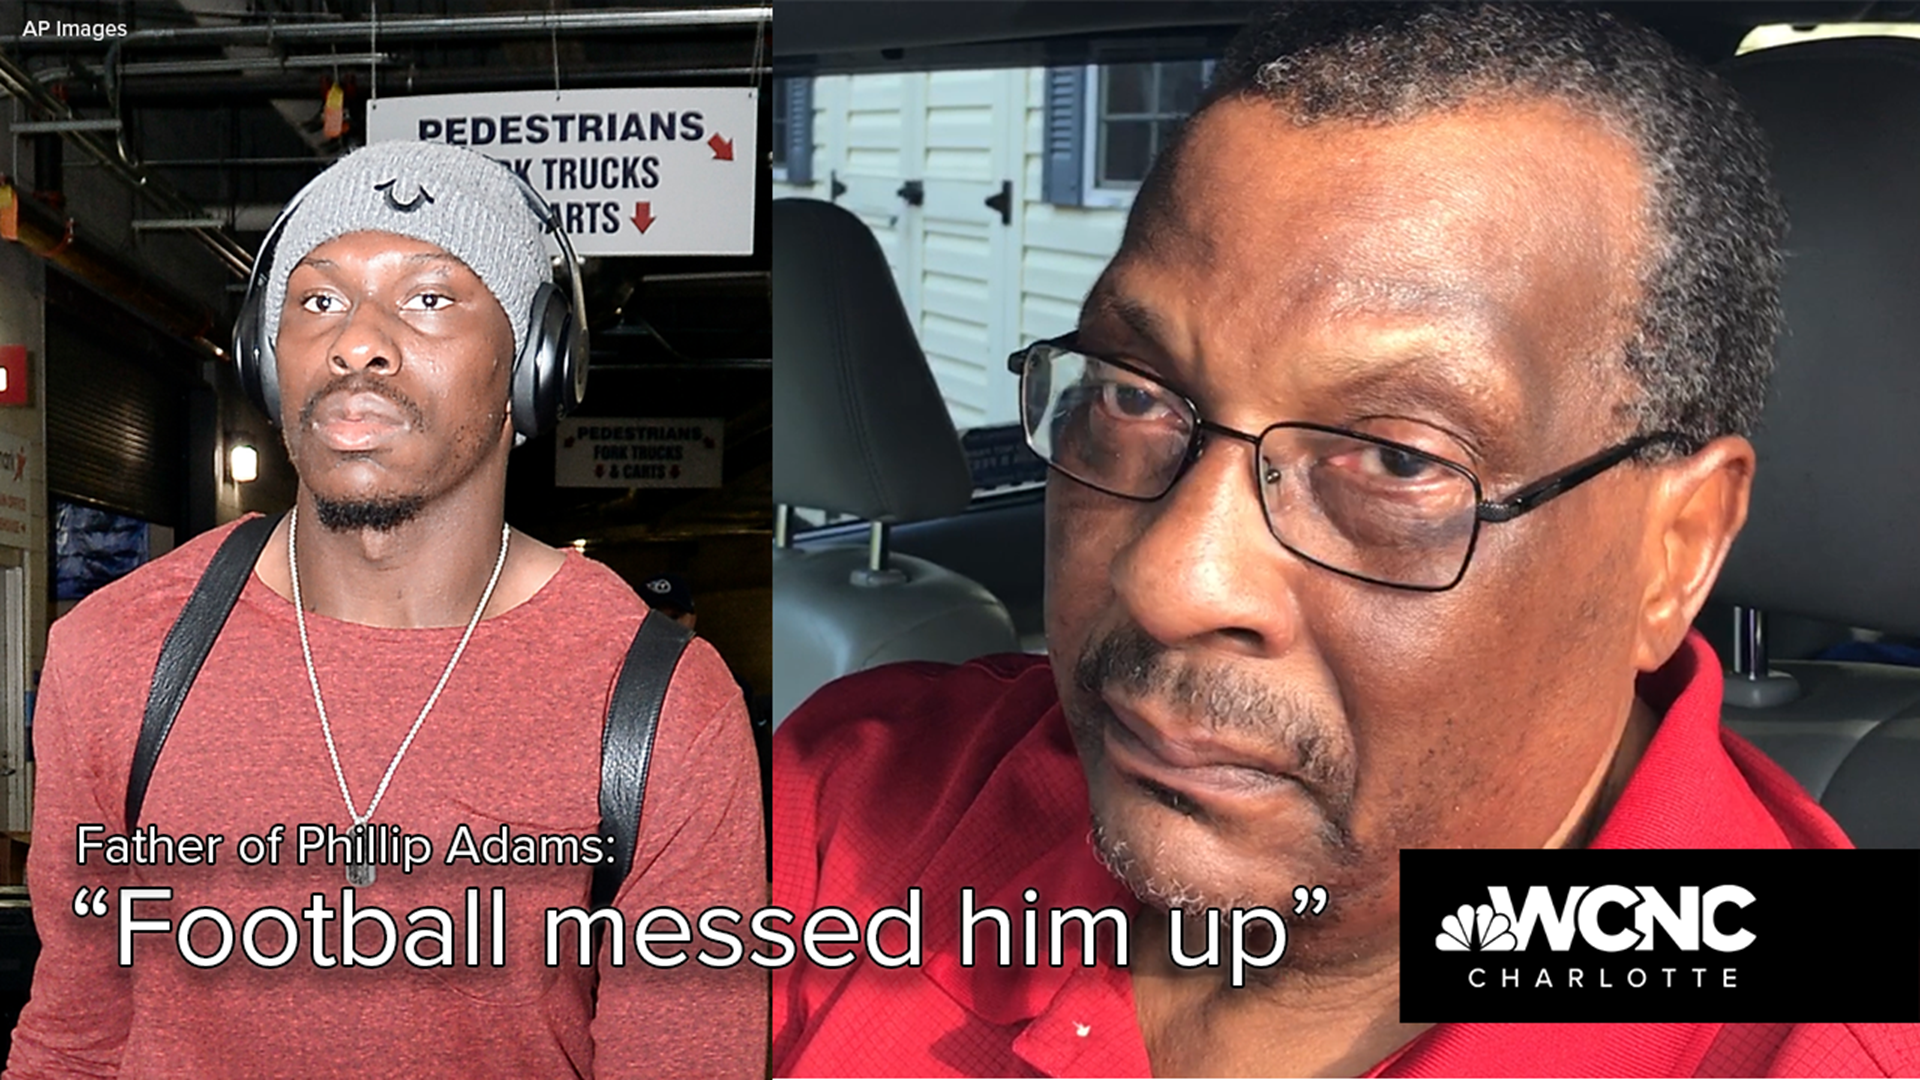 The father of Phillip Adams, a former football player accused of shooting 6, thinks "football messed him up."